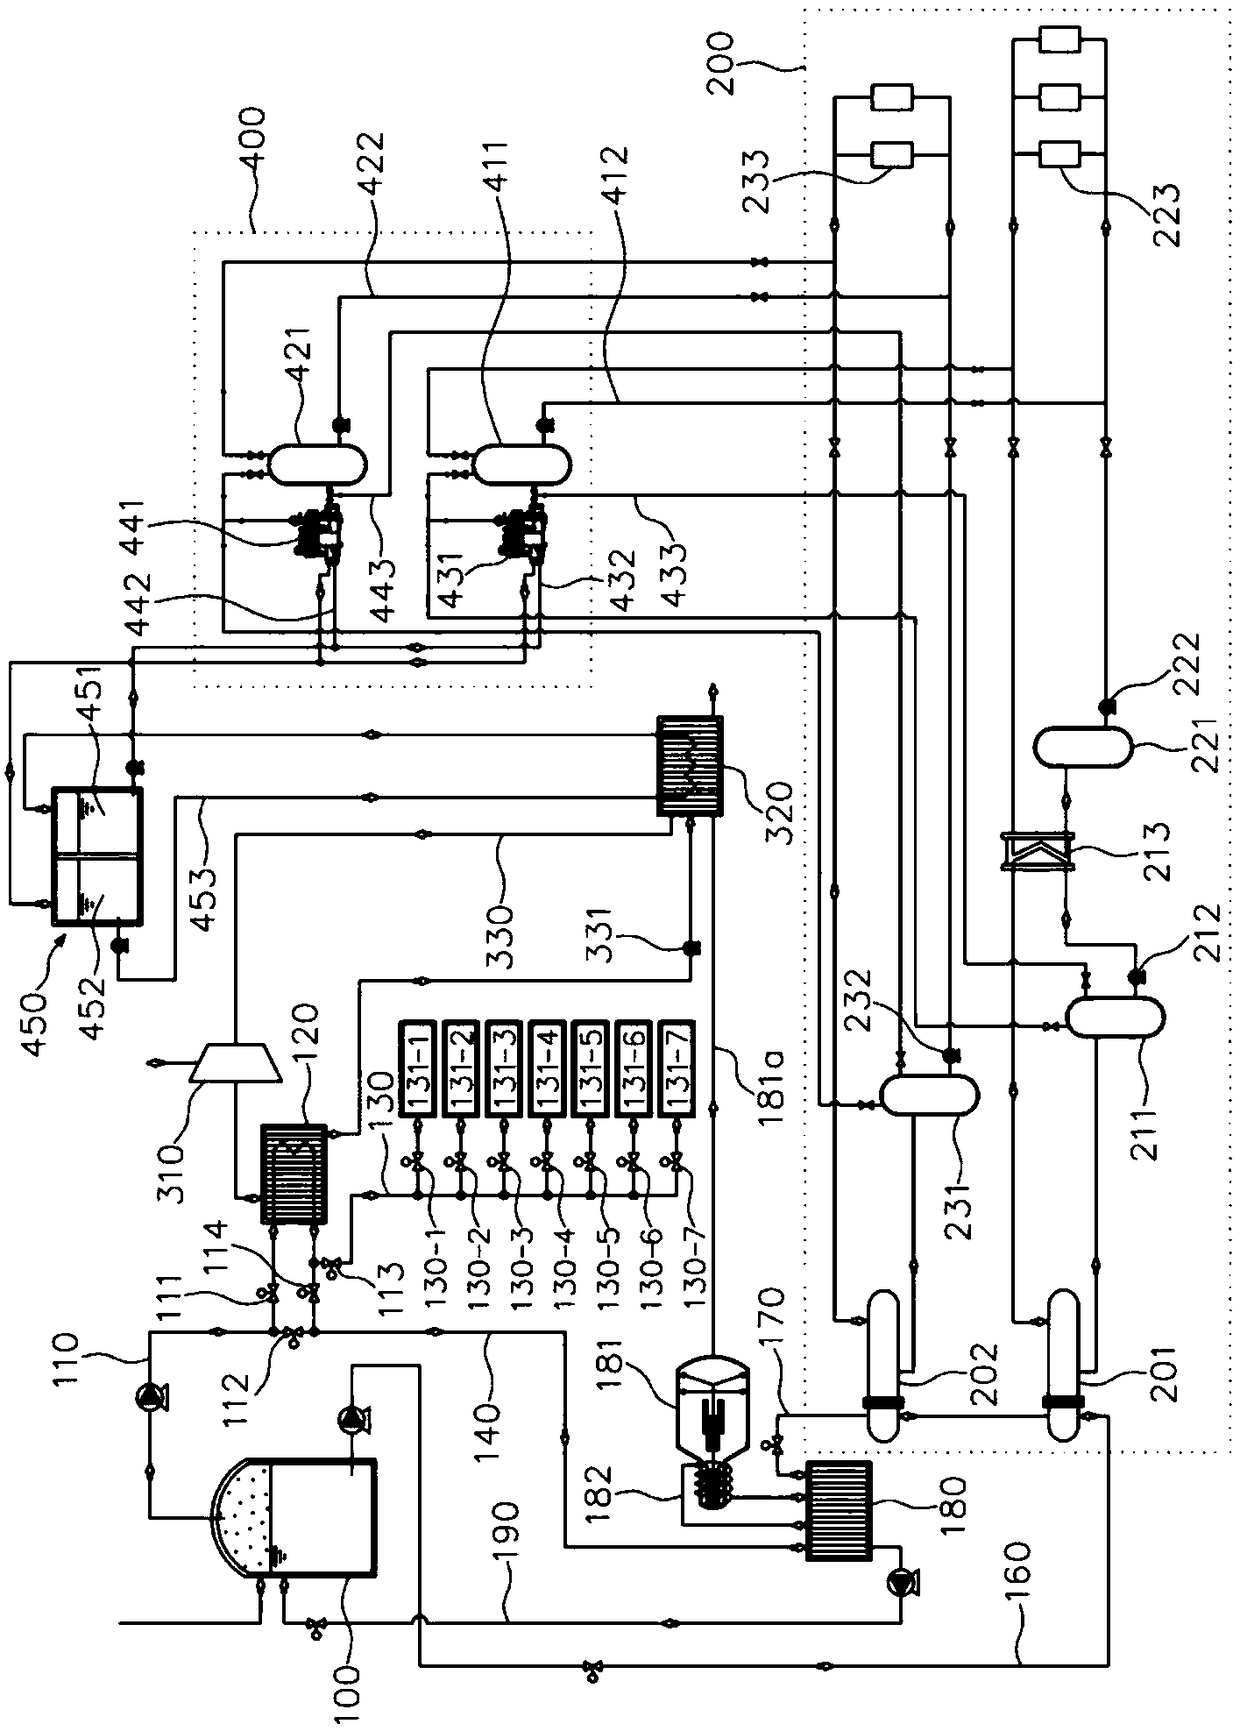 LNG optimal control reliquefaction system for recovery of LNG low-temperature waste heat generated in LNG gasification process